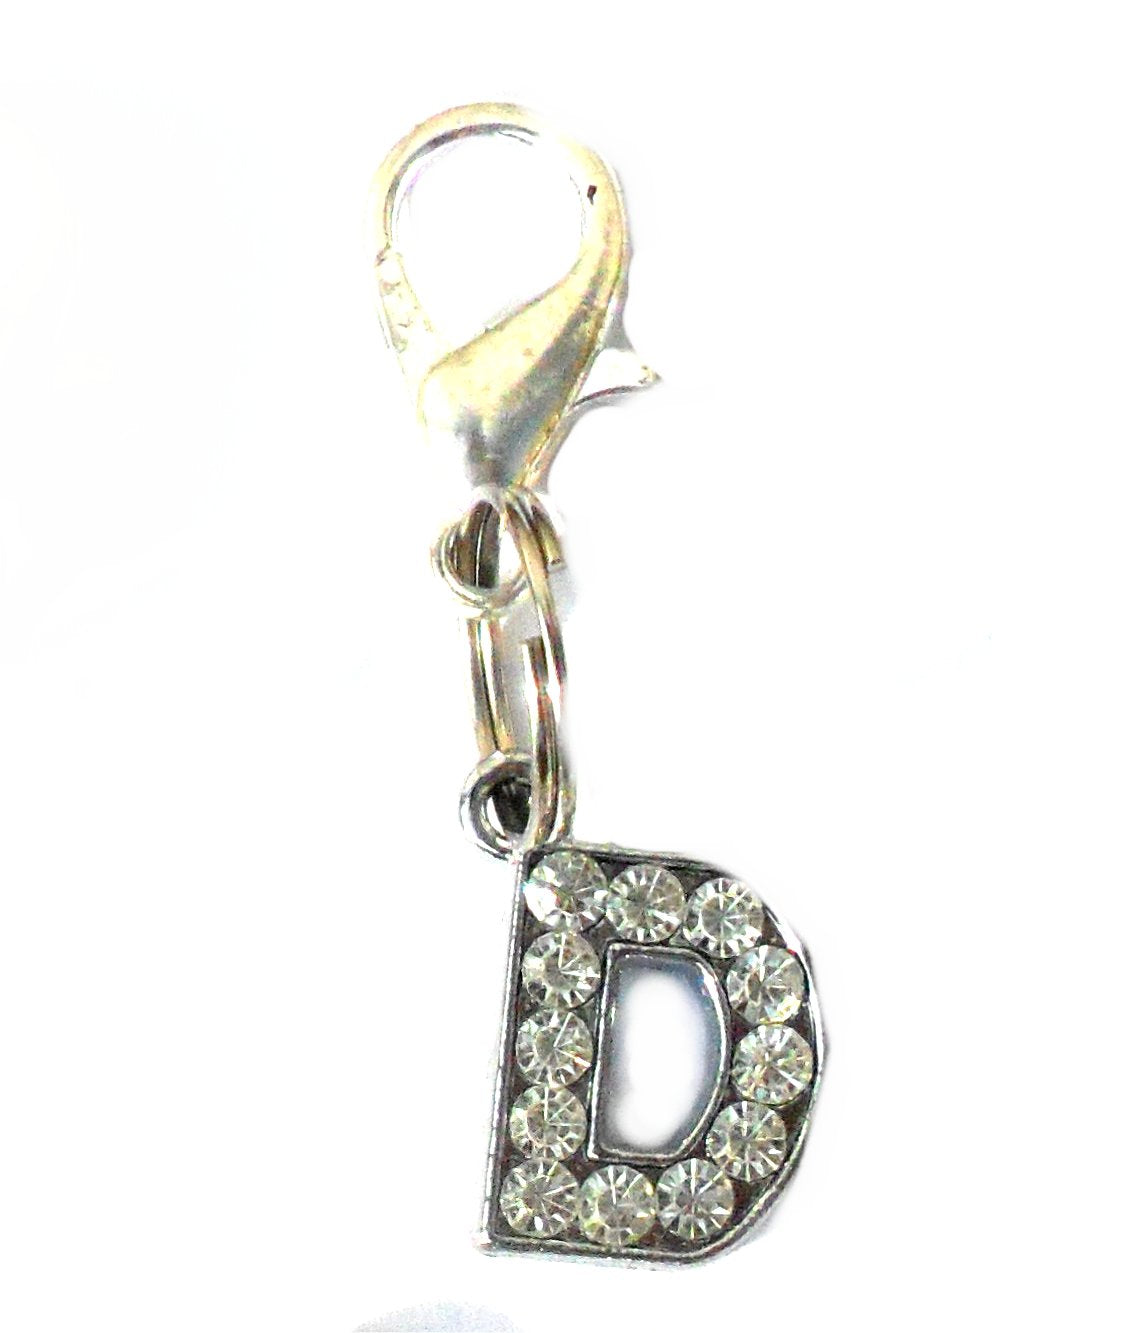 A-Z Crystal Letter Pet Charms